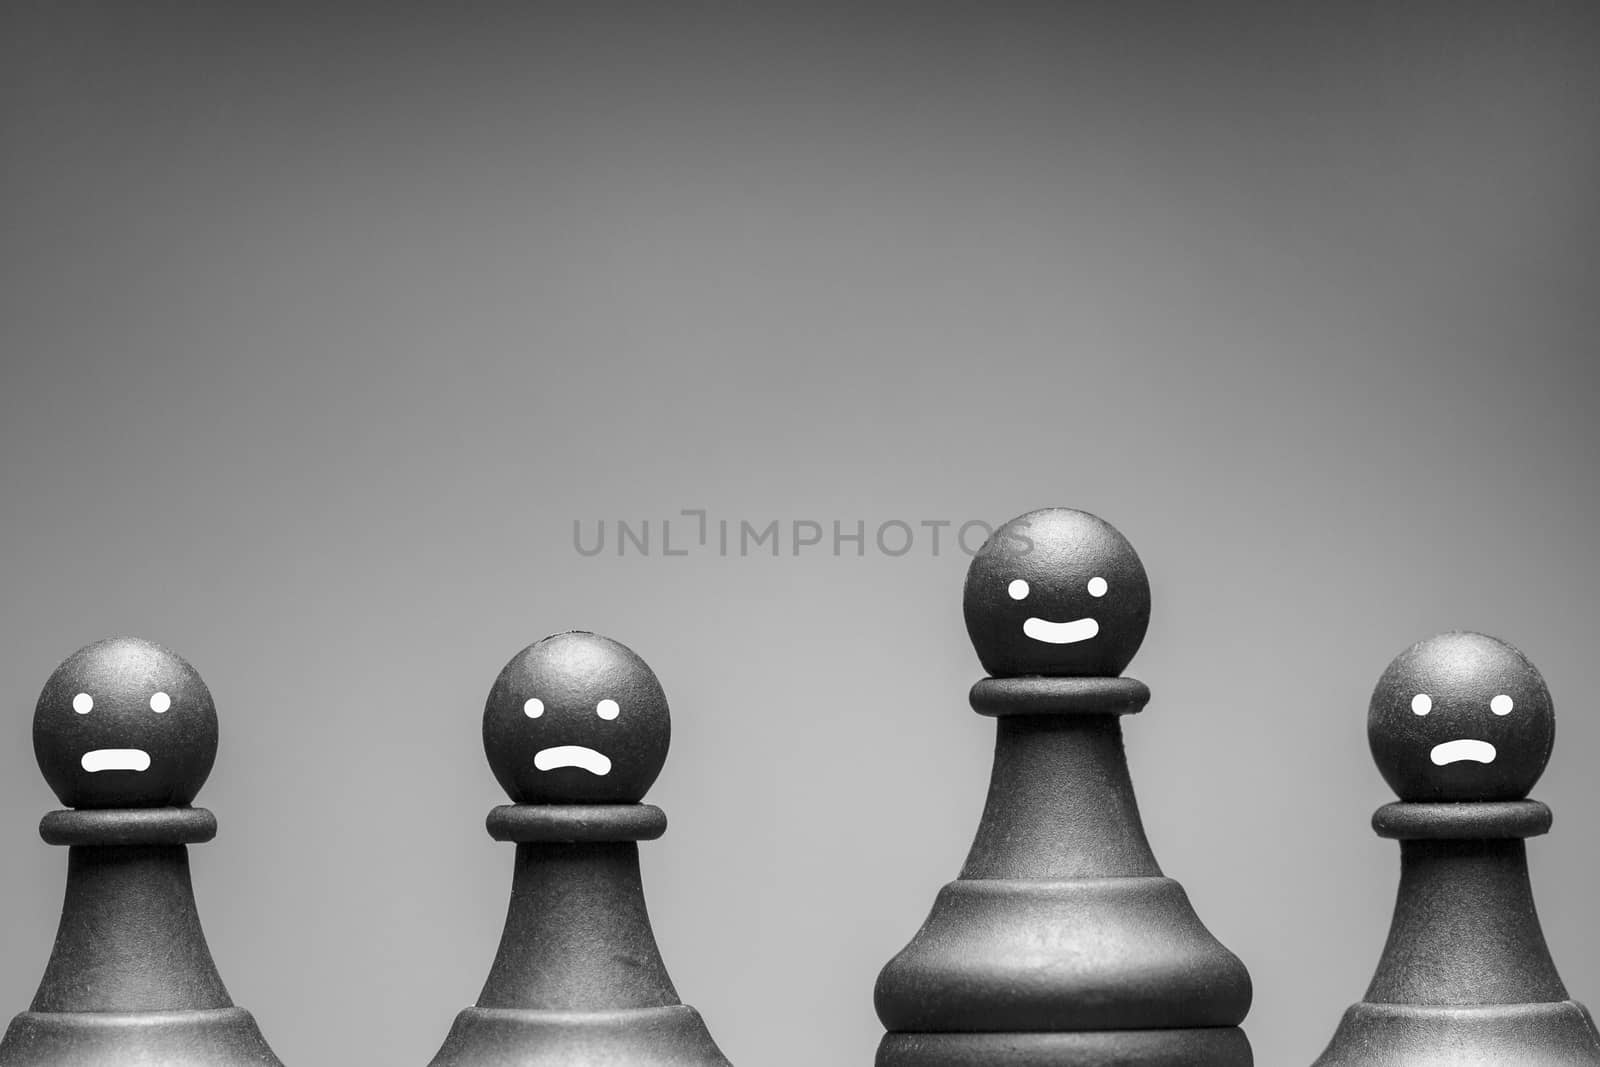 Greyscale image of chess pieces with faces by sergii_gnatiuk